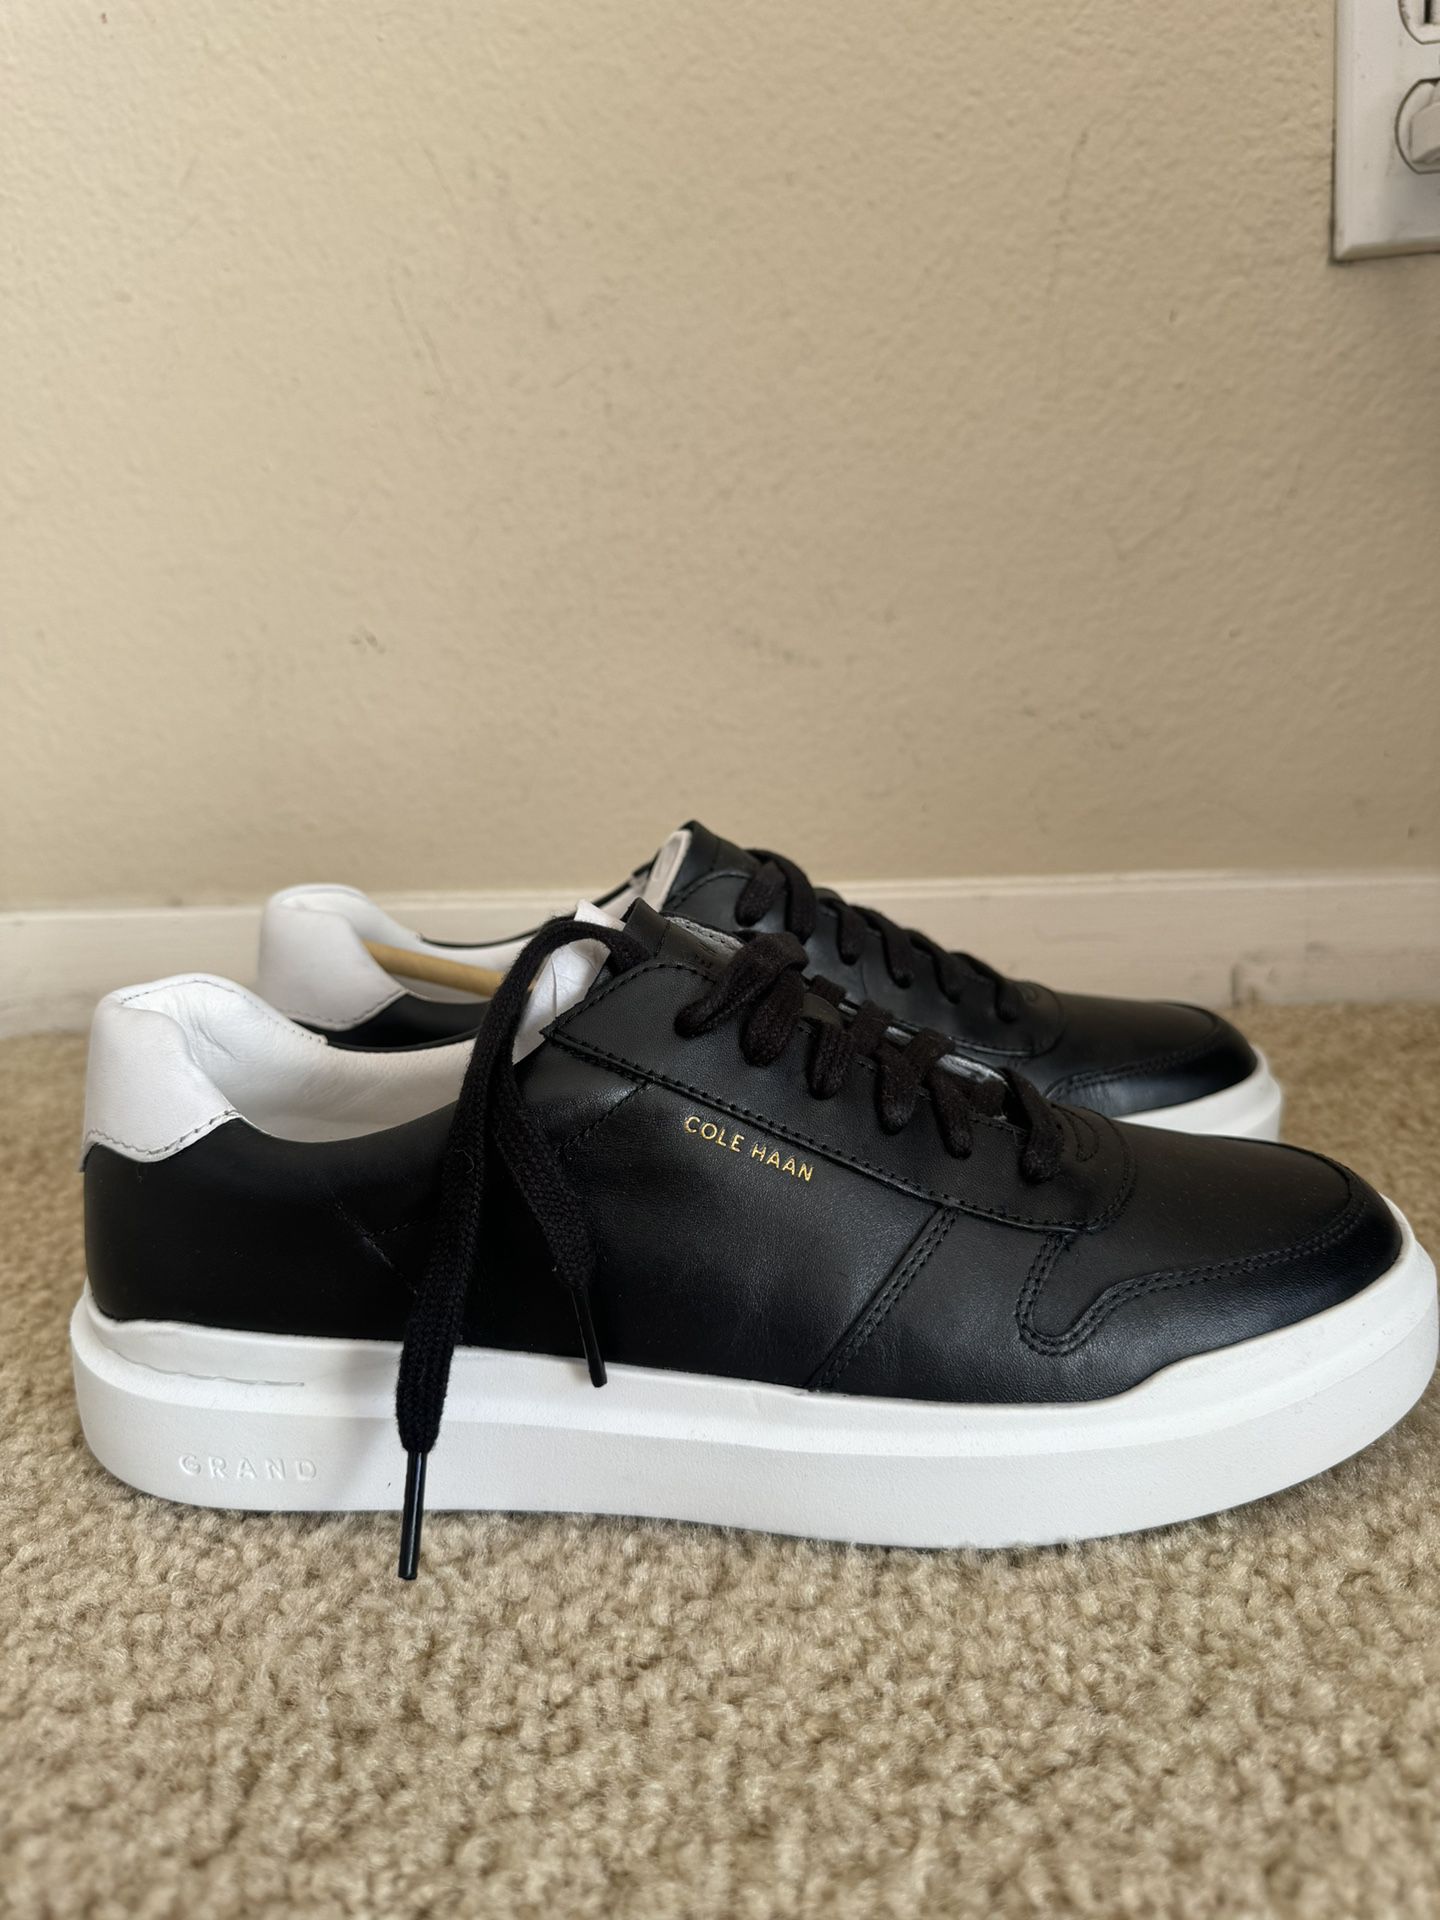 Brand New Cole Haan Leather GrandPro Tennis Sneakers 9.5B